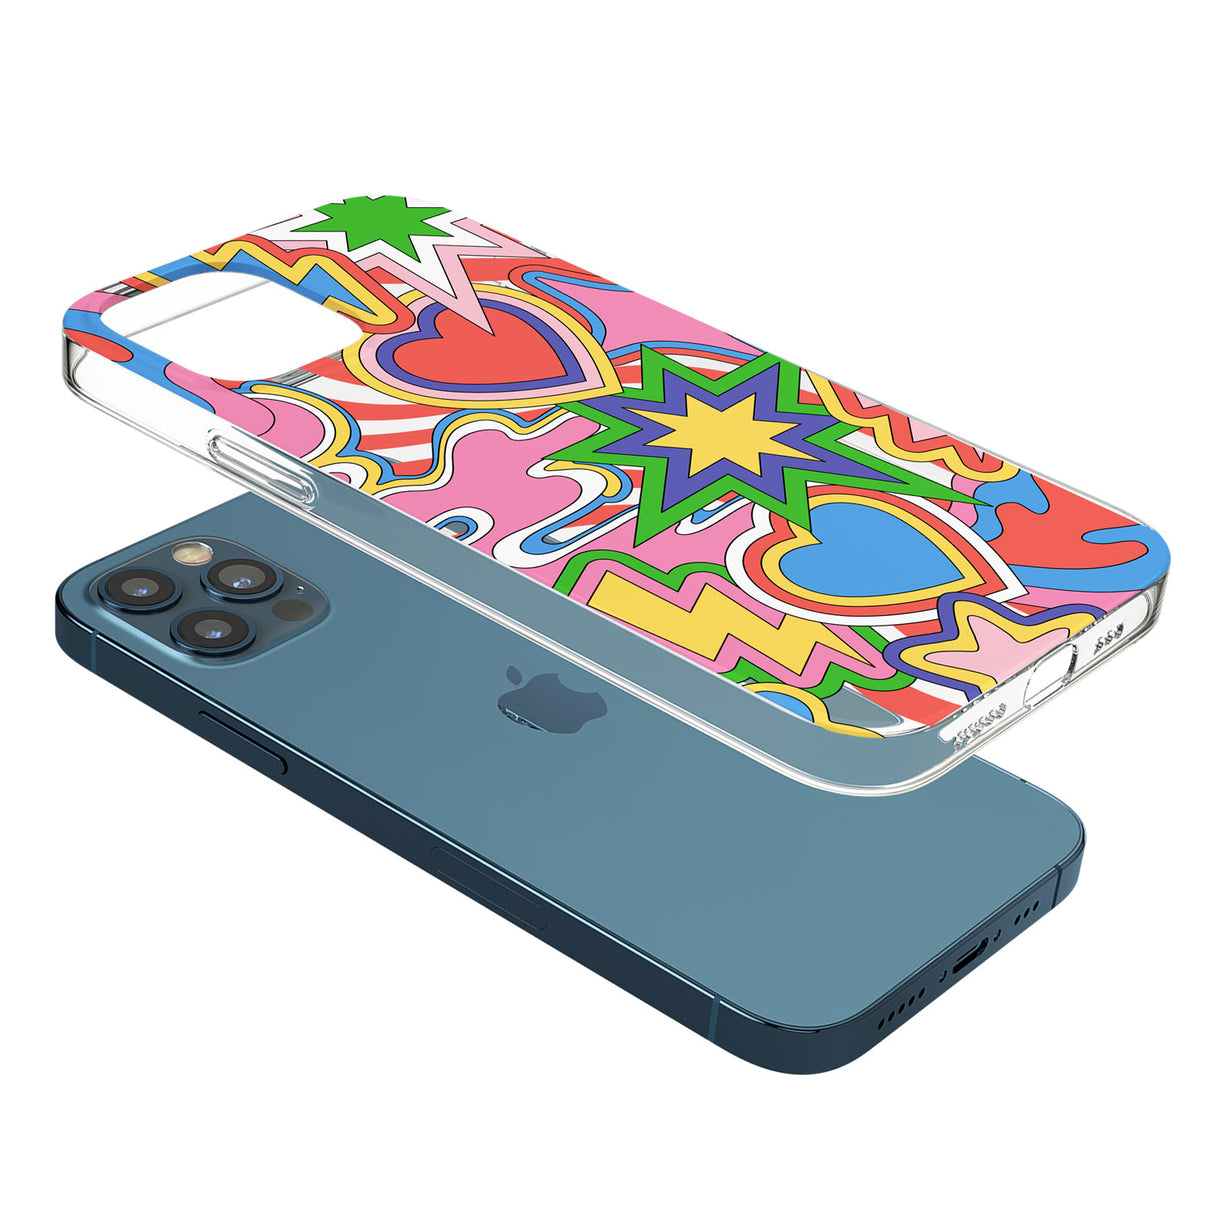 Psychedelic Pop Art Explosion Phone Case for iPhone 12 Pro